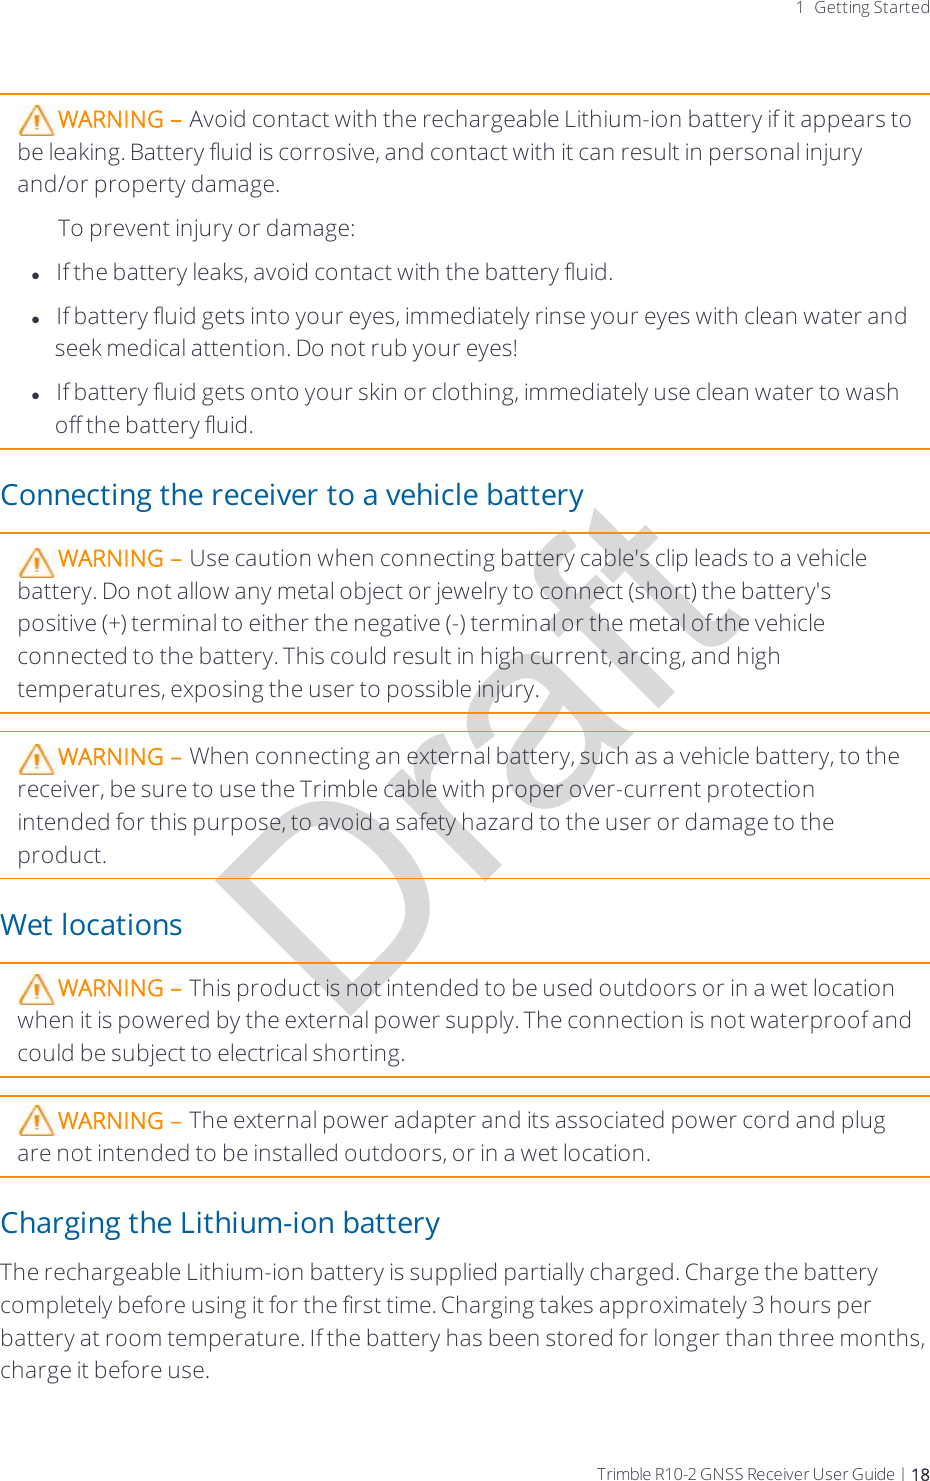 Draft1 Getting StartedWARNING – Avoid contact with the rechargeable Lithium-ion battery if it appears to be leaking. Battery fluid is corrosive, and contact with it can result in personal injury and/or property damage.To prevent injury or damage:lIf the battery leaks, avoid contact with the battery fluid.lIf battery fluid gets into your eyes, immediately rinse your eyes with clean water and seek medical attention. Do not rub your eyes!lIf battery fluid gets onto your skin or clothing, immediately use clean water to wash off the battery fluid.Connecting the receiver to a vehicle batteryWARNING – Use caution when connecting battery cable&apos;s clip leads to a vehicle battery. Do not allow any metal object or jewelry to connect (short) the battery&apos;s positive (+) terminal to either the negative (-) terminal or the metal of the vehicle connected to the battery. This could result in high current, arcing, and high temperatures, exposing the user to possible injury.WARNING – When connecting an external battery, such as a vehicle battery, to the receiver, be sure to use the Trimble cable with proper over-current protection intended for this purpose, to avoid a safety hazard to the user or damage to the product.Wet locationsWARNING – This product is not intended to be used outdoors or in a wet location when it is powered by the external power supply. The connection is not waterproof and could be subject to electrical shorting.WARNING – The external power adapter and its associated power cord and plug are not intended to be installed outdoors, or in a wet location.Charging the Lithium-ion batteryThe rechargeable Lithium-ion battery is supplied partially charged. Charge the battery completely before using it for the first time. Charging takes approximately 3 hours per battery at room temperature. If the battery has been stored for longer than three months, charge it before use.Trimble R10-2 GNSS Receiver User Guide | 18